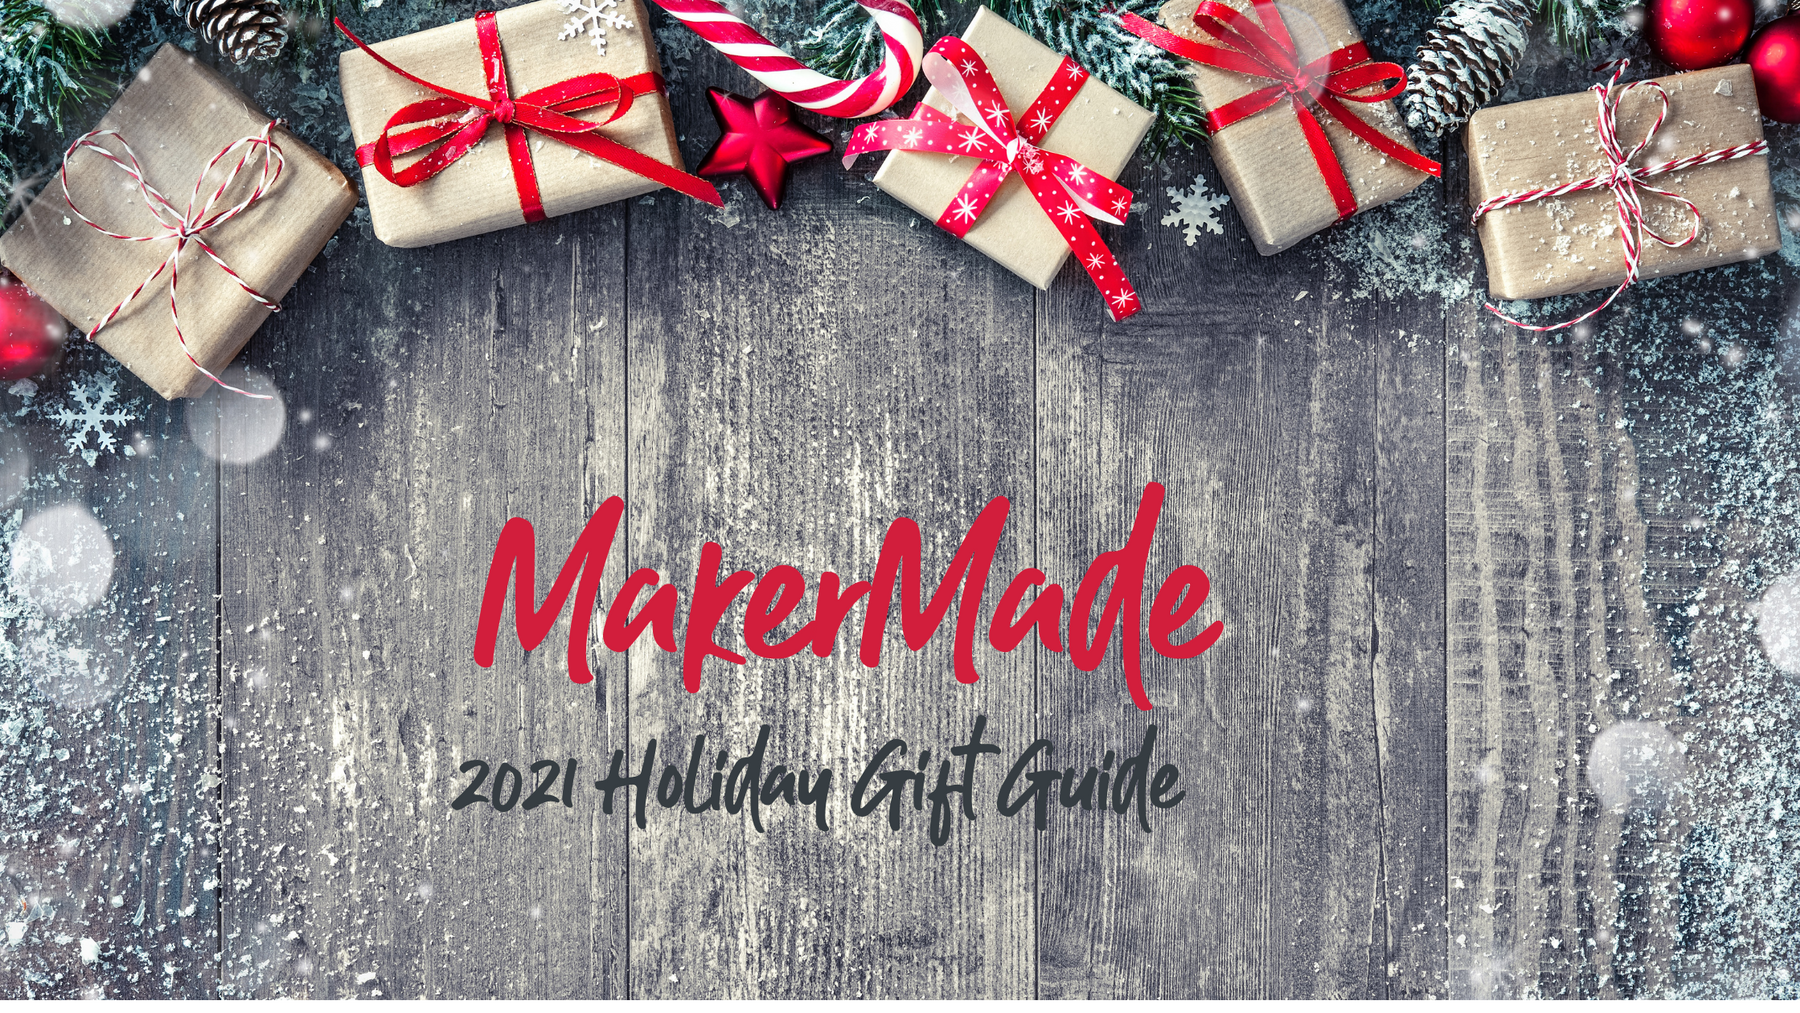 Shop Small Makers this Holiday!